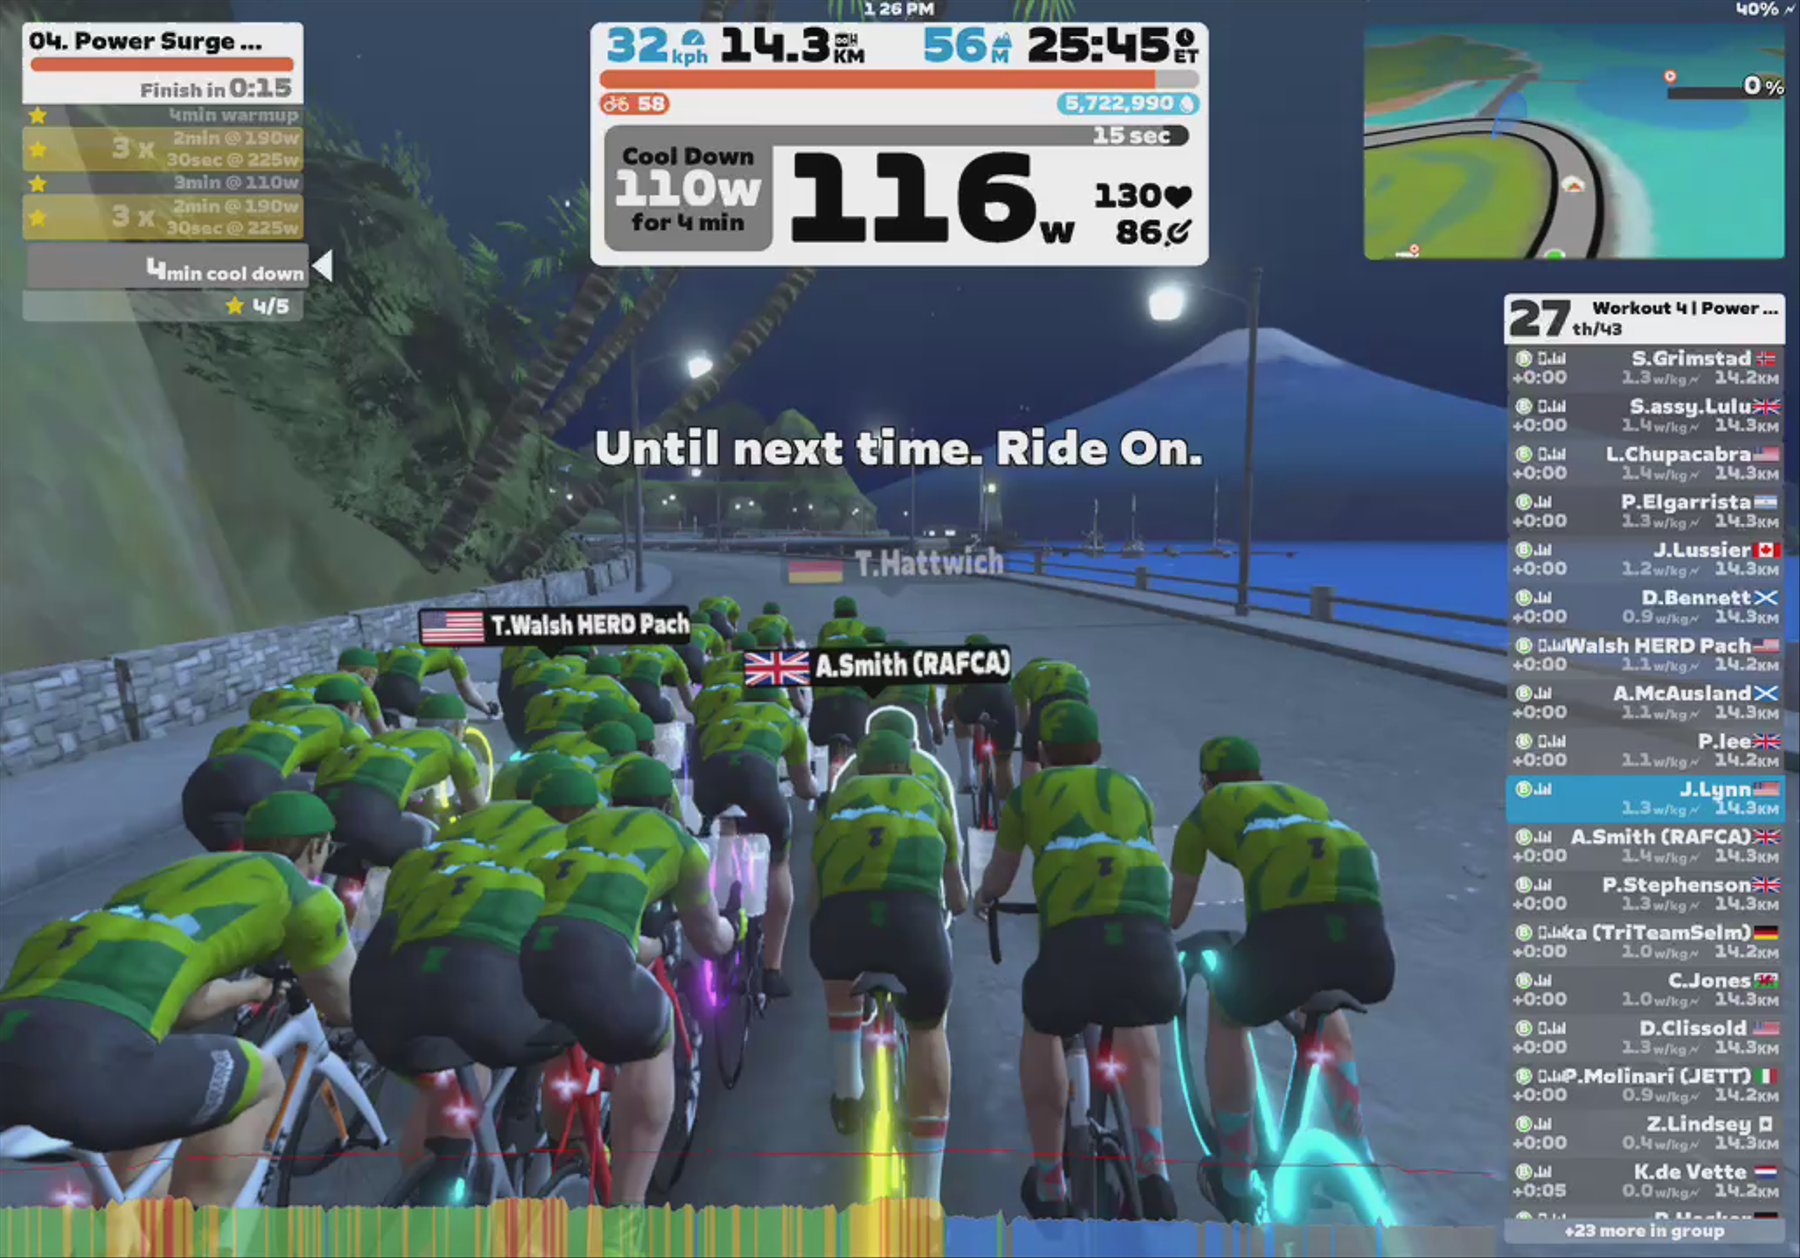 Zwift - Group Workout: Short - Power Surge  on Turf N Surf in Makuri Islands